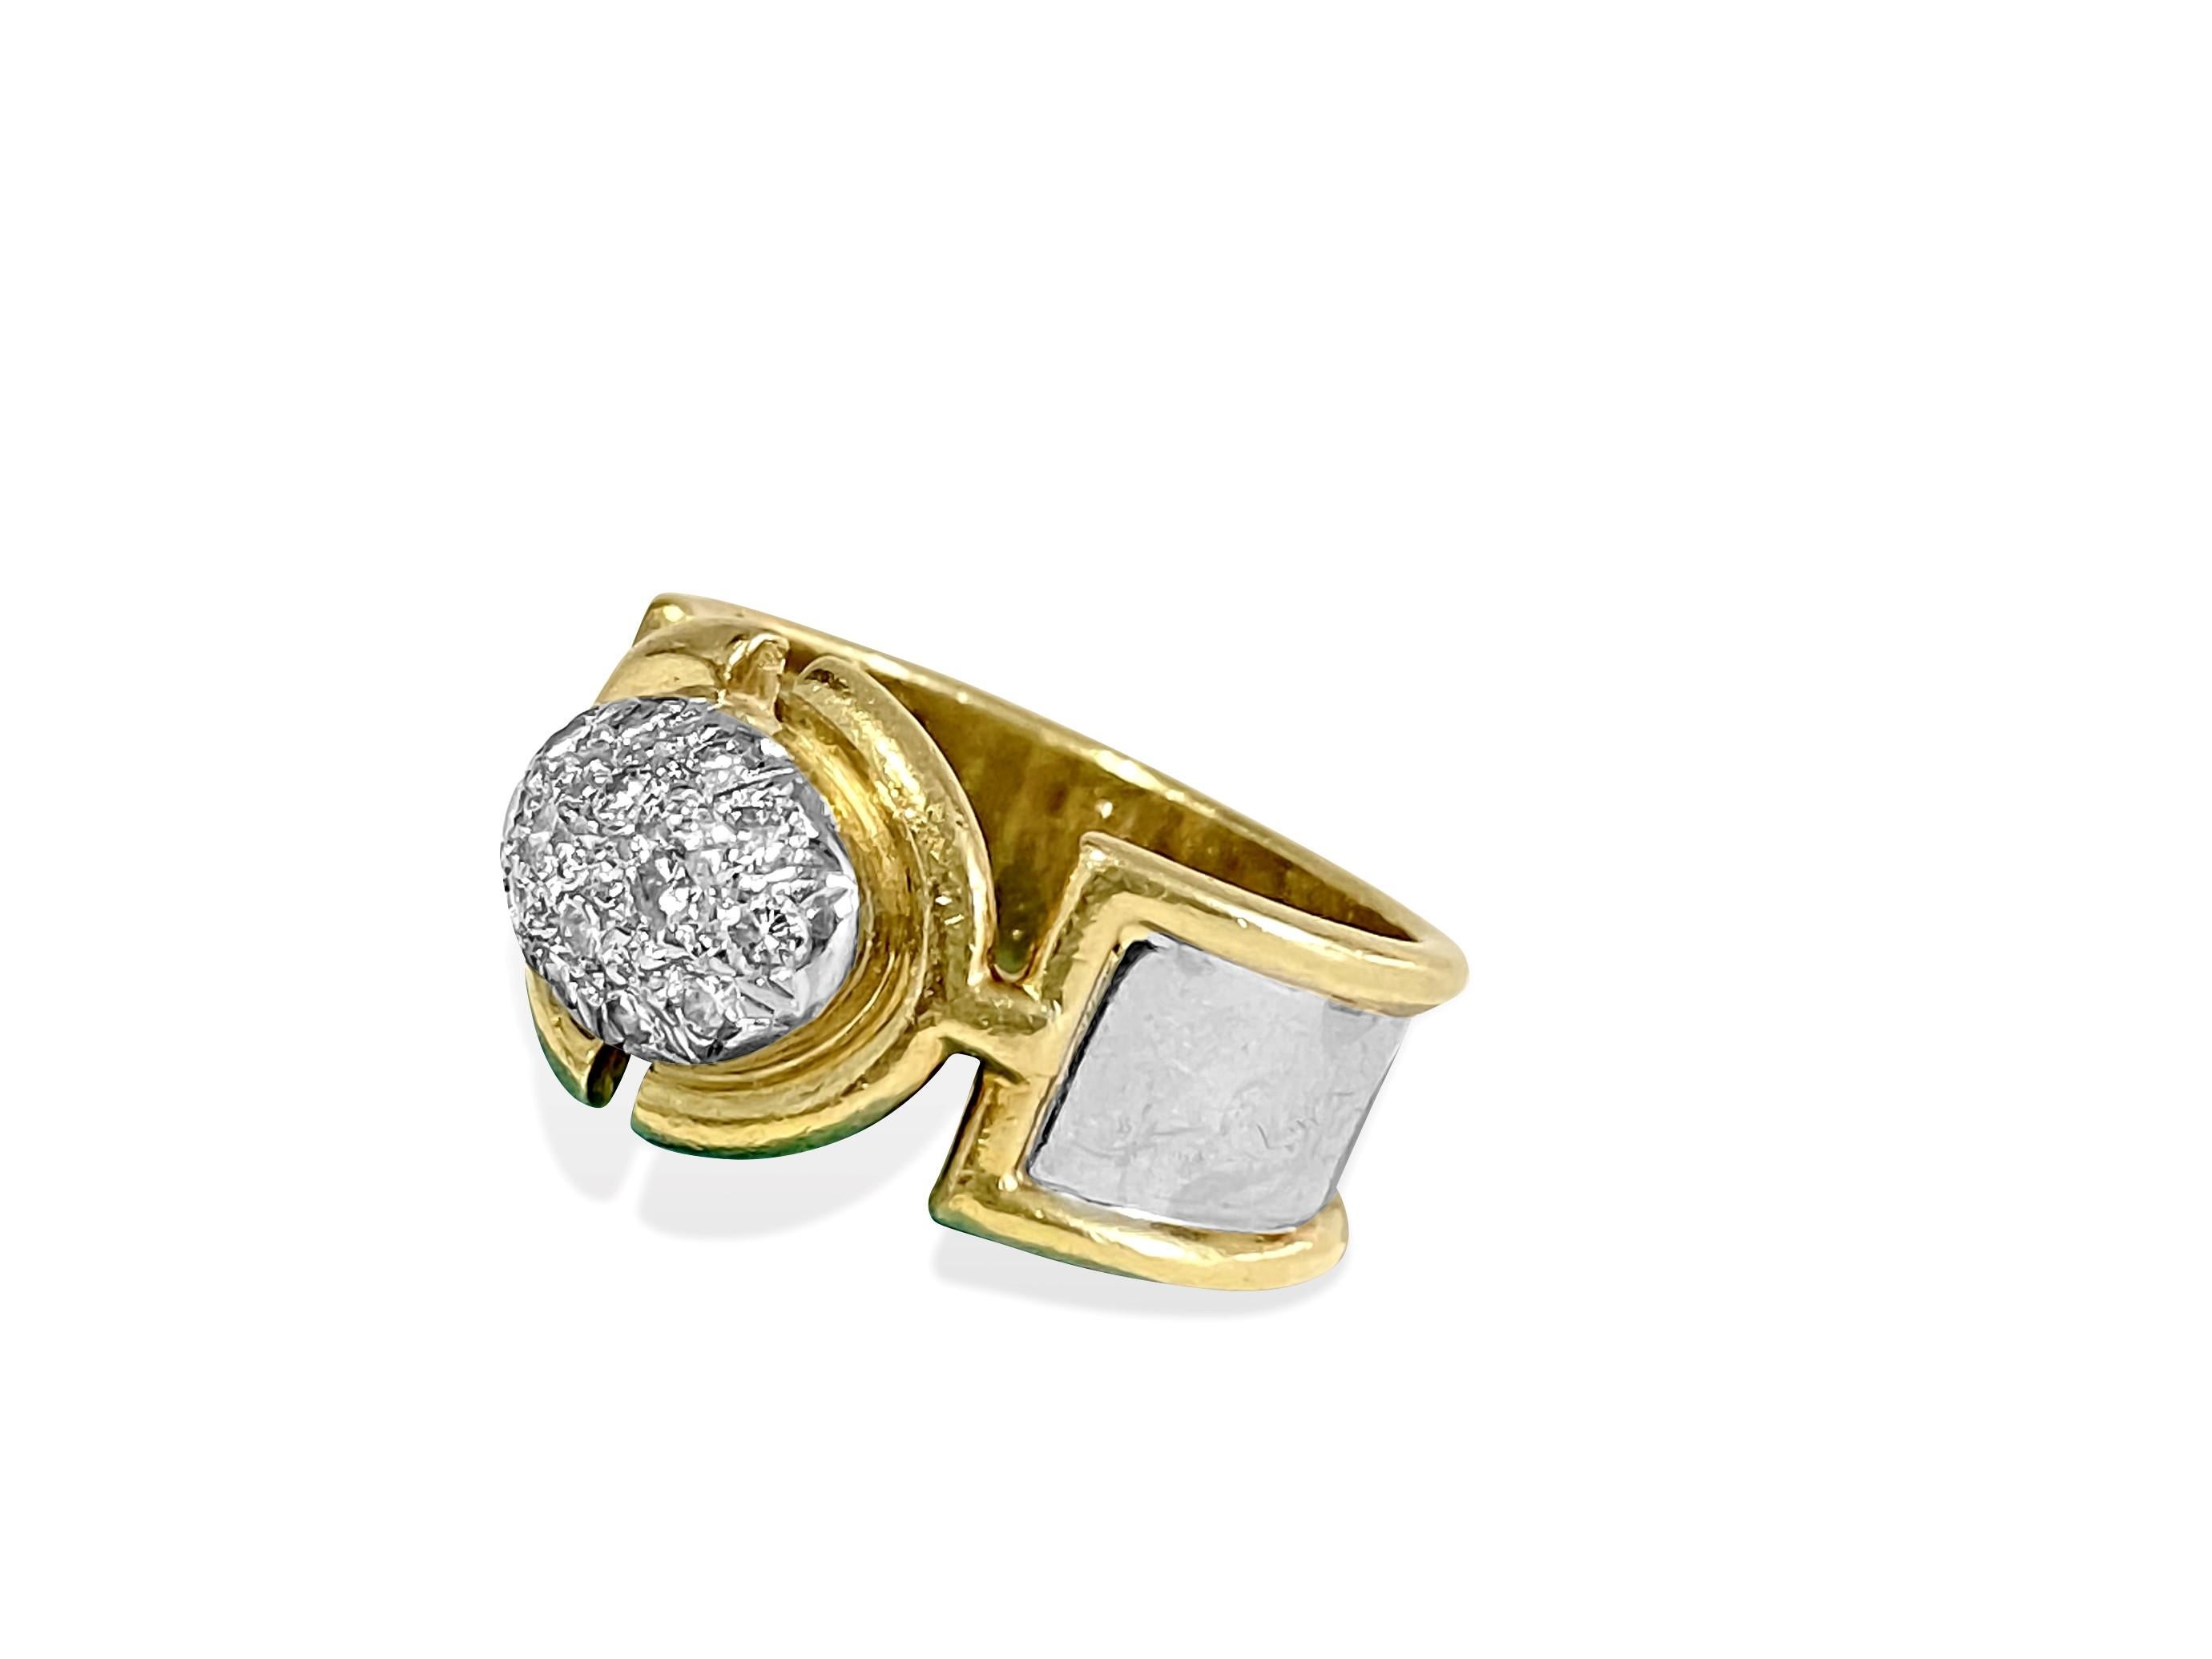 Metal: 18k yellow and white gold.
Total carat weight of diamonds: 0.70 carats. VS clarity and F-G color. Round brilliant cut diamonds. All diamonds are 100% natural earth mined. 

This is a vintage ladies art nouveau diamond and gold ring. 

Perfect